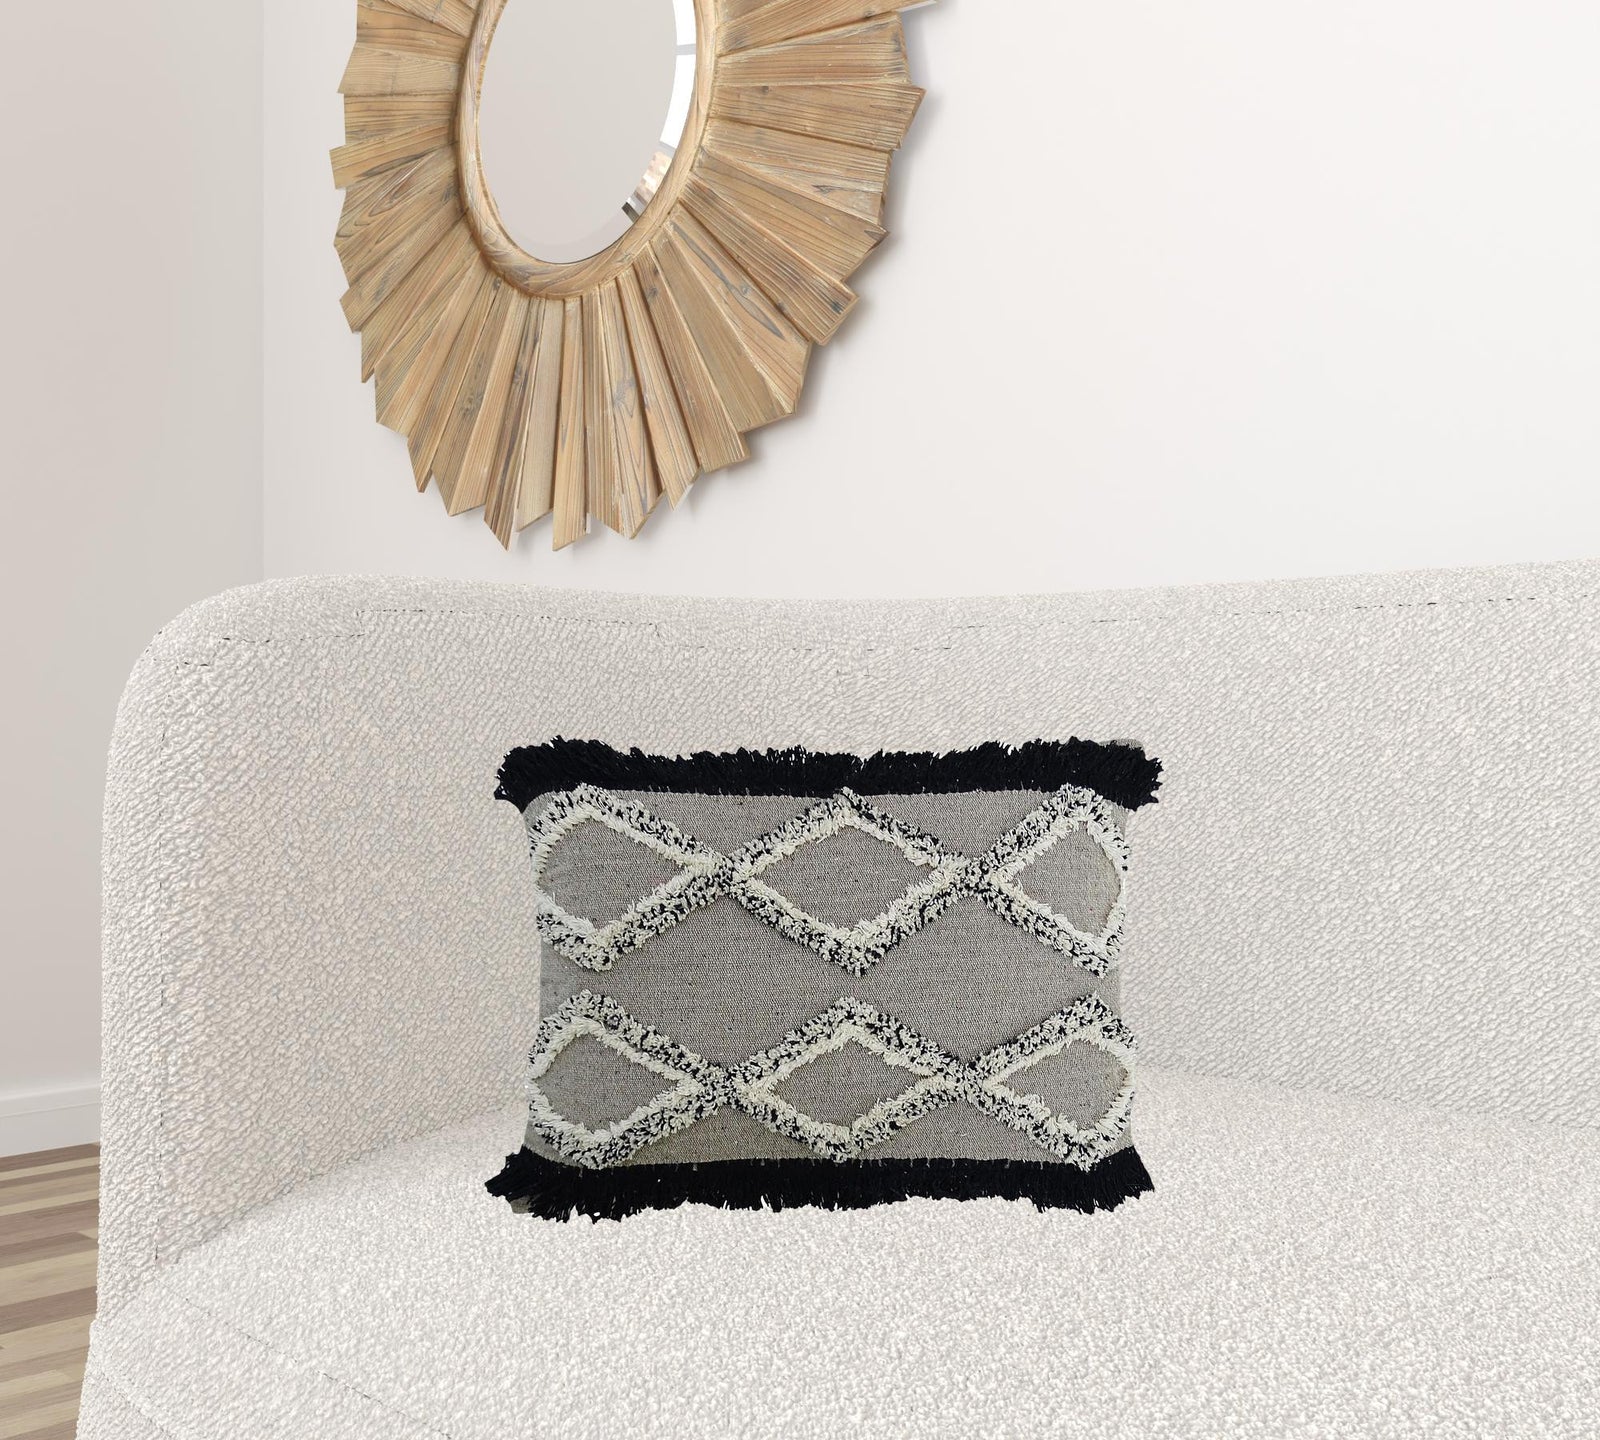 16" X 22" Black And Gray Diamond Handmade Cotton Blend Throw Pillow With Fringe